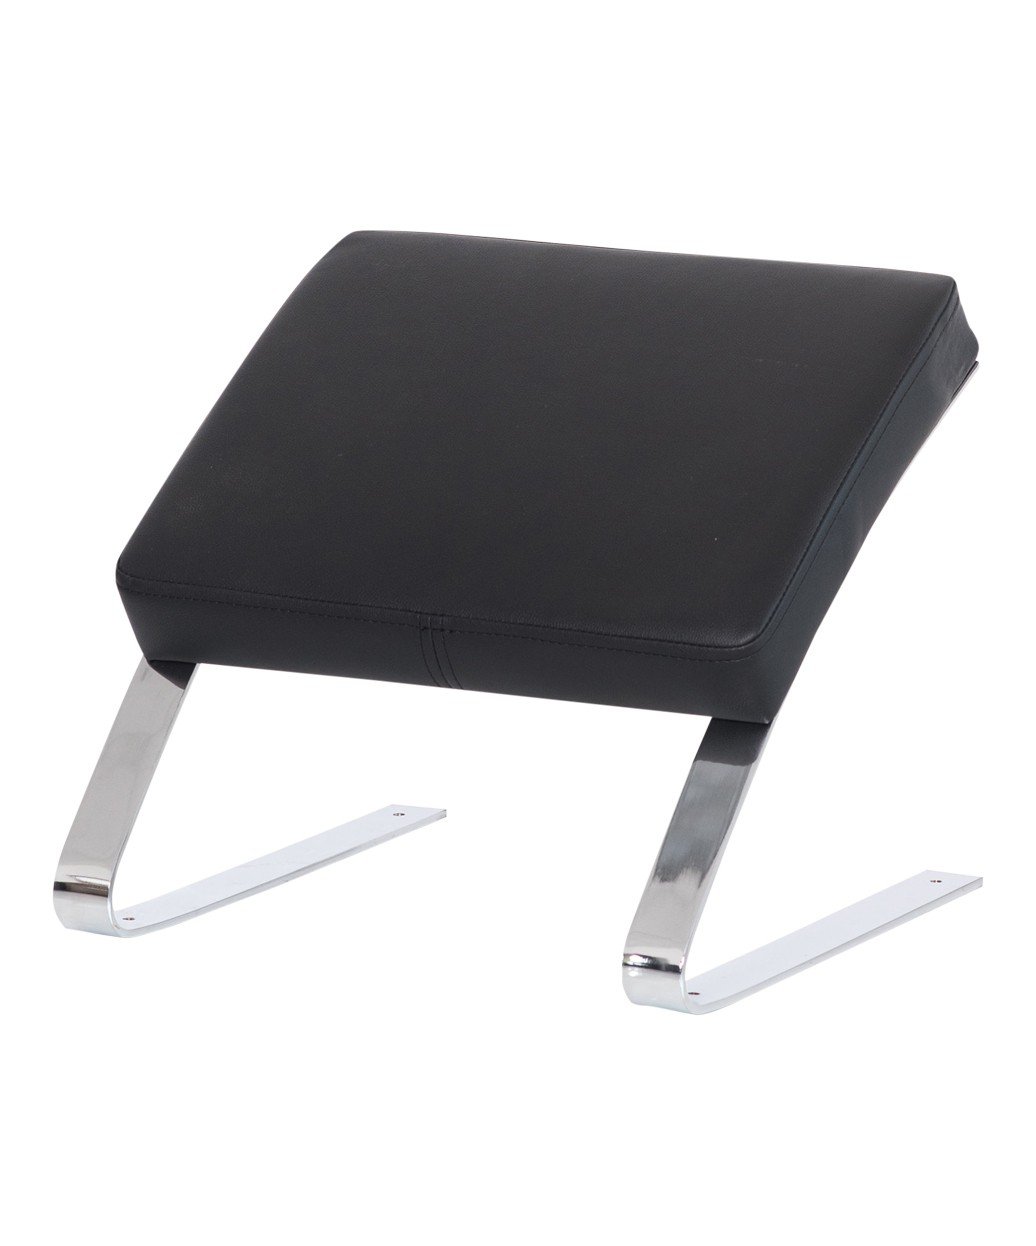 Deluxe Footrest Ottoman for Backwash